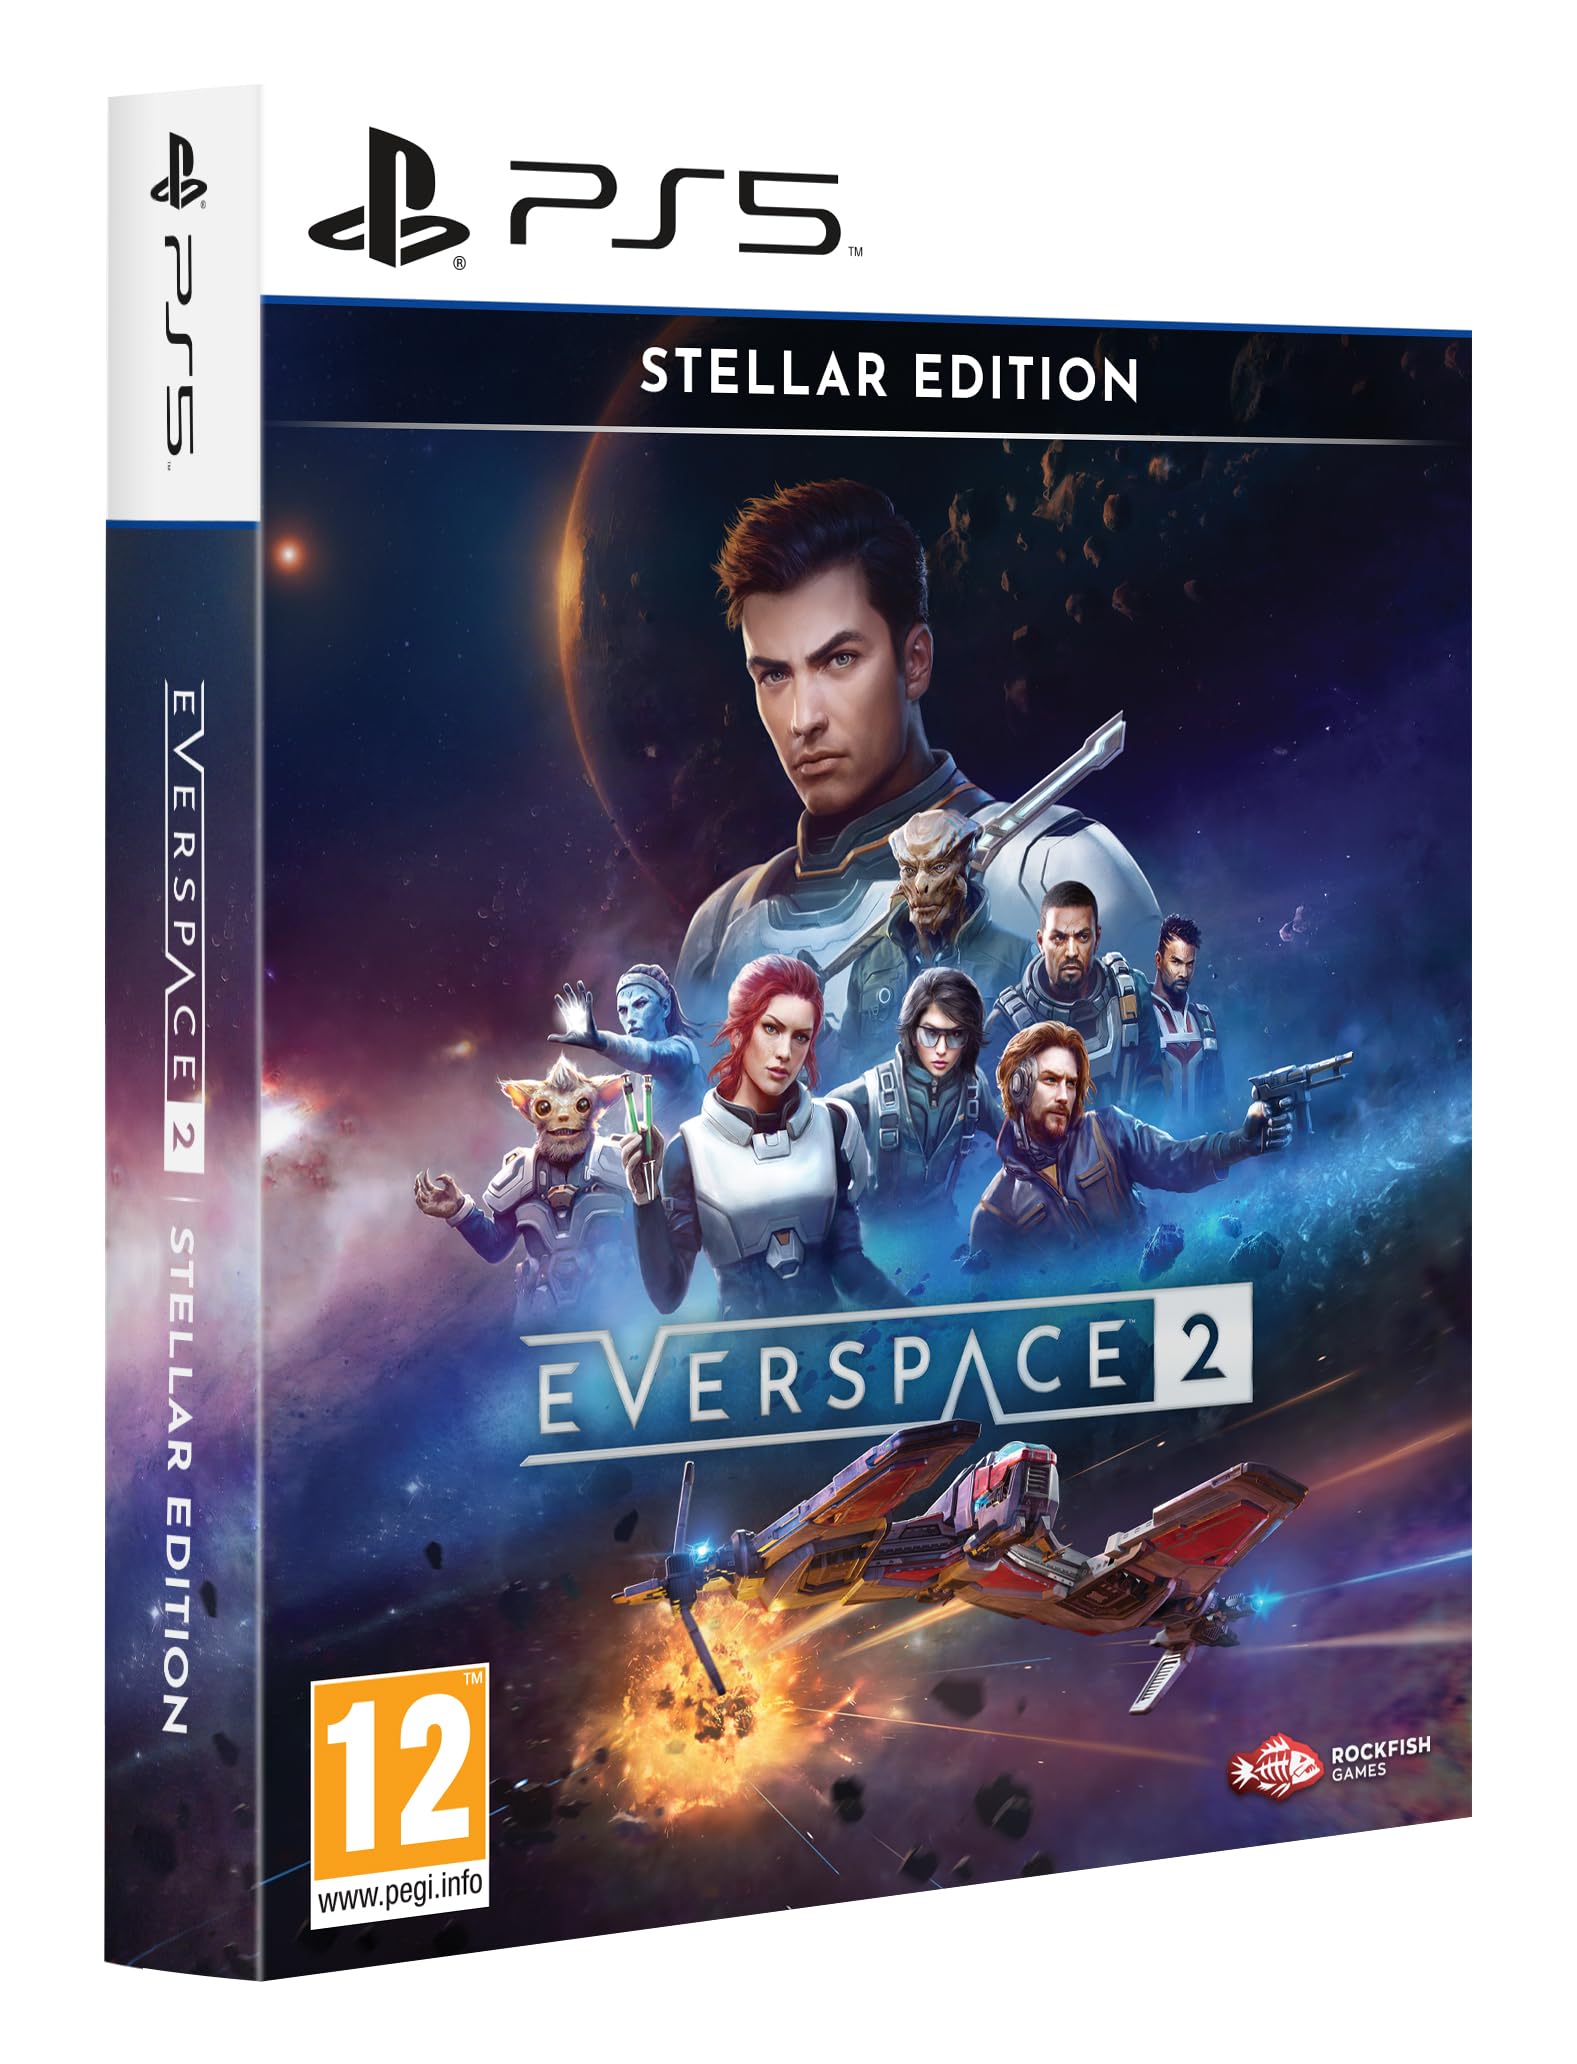 EVERSPACE 2: STELLAR EDITION PS5